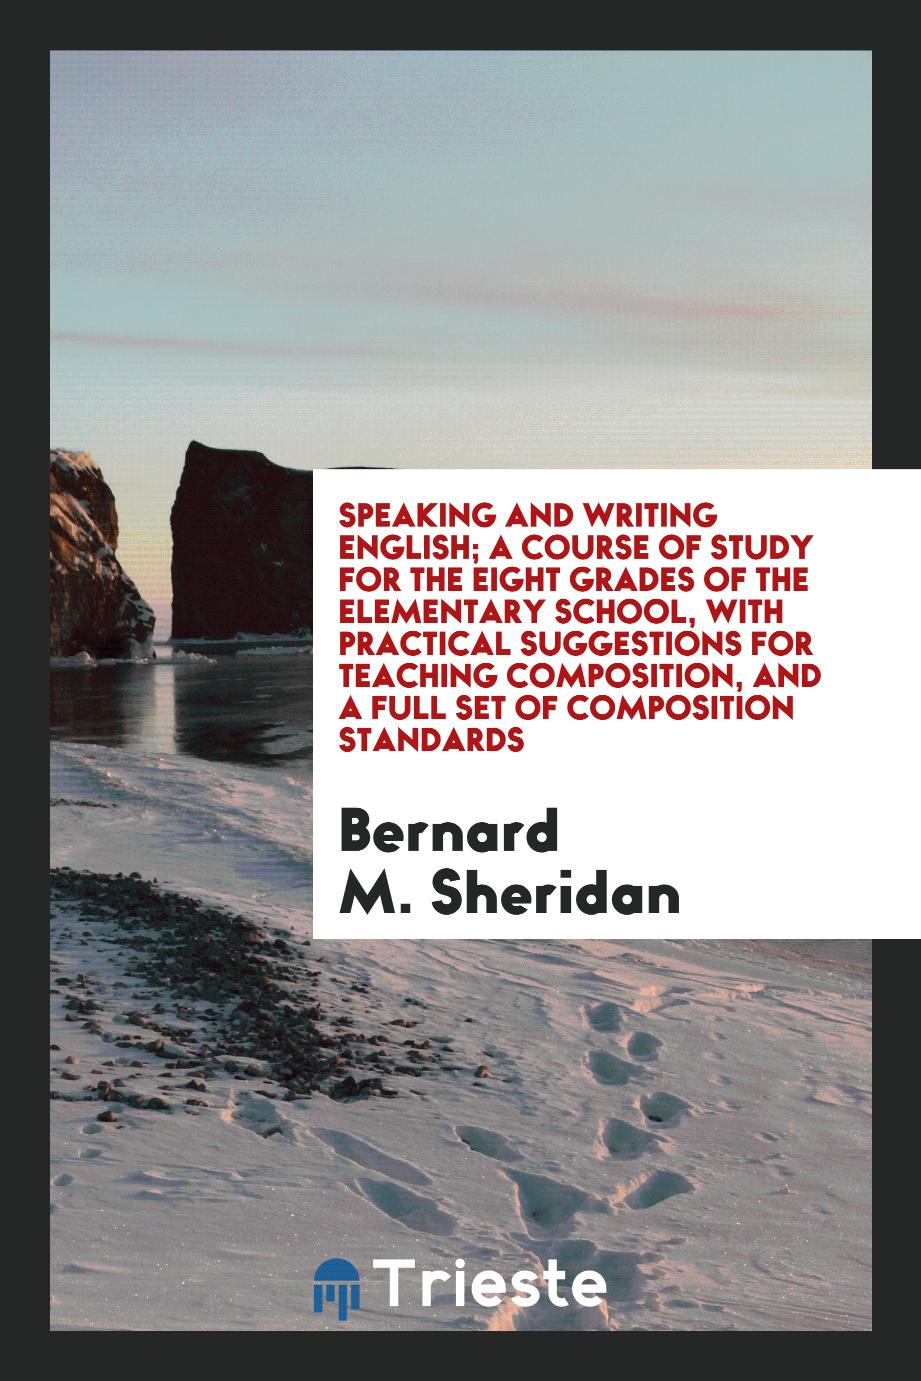 Speaking and Writing English; A Course of Study for the Eight Grades of the Elementary School, with Practical Suggestions for Teaching Composition, and a Full Set of Composition Standards